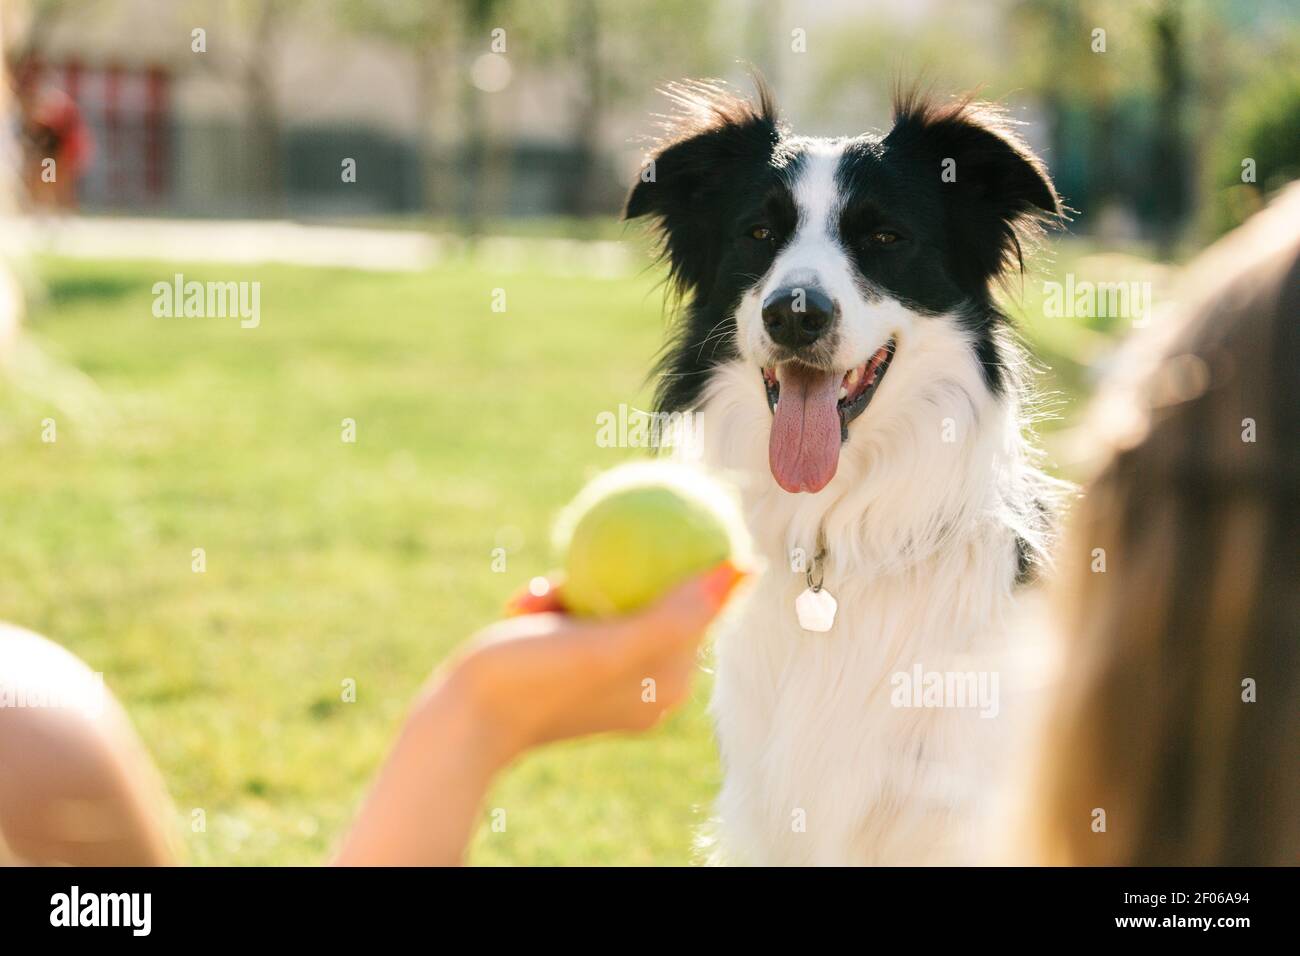 https://c8.alamy.com/comp/2F06A94/cropped-unrecognizable-people-sitting-on-meadow-in-summer-and-playing-with-fluffy-border-collie-dog-on-sunny-day-at-weekend-2F06A94.jpg